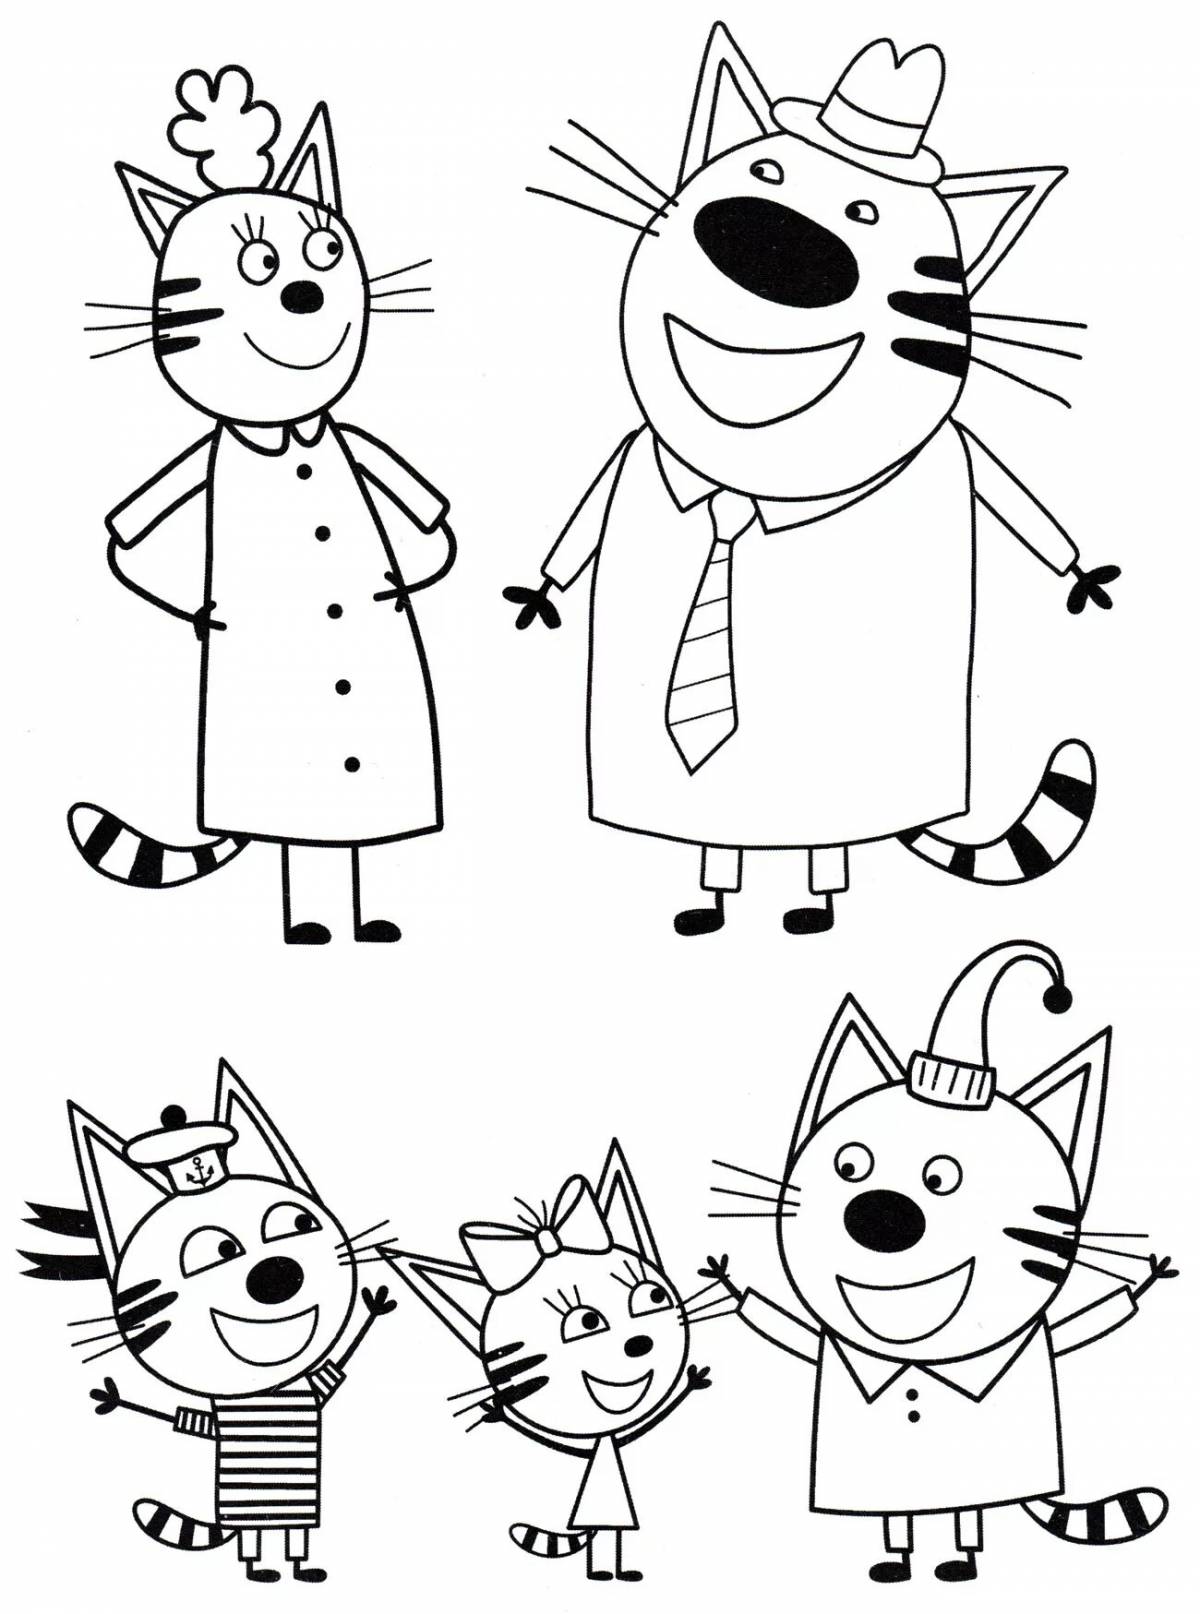 Fascinating coloring 3 cats for kids